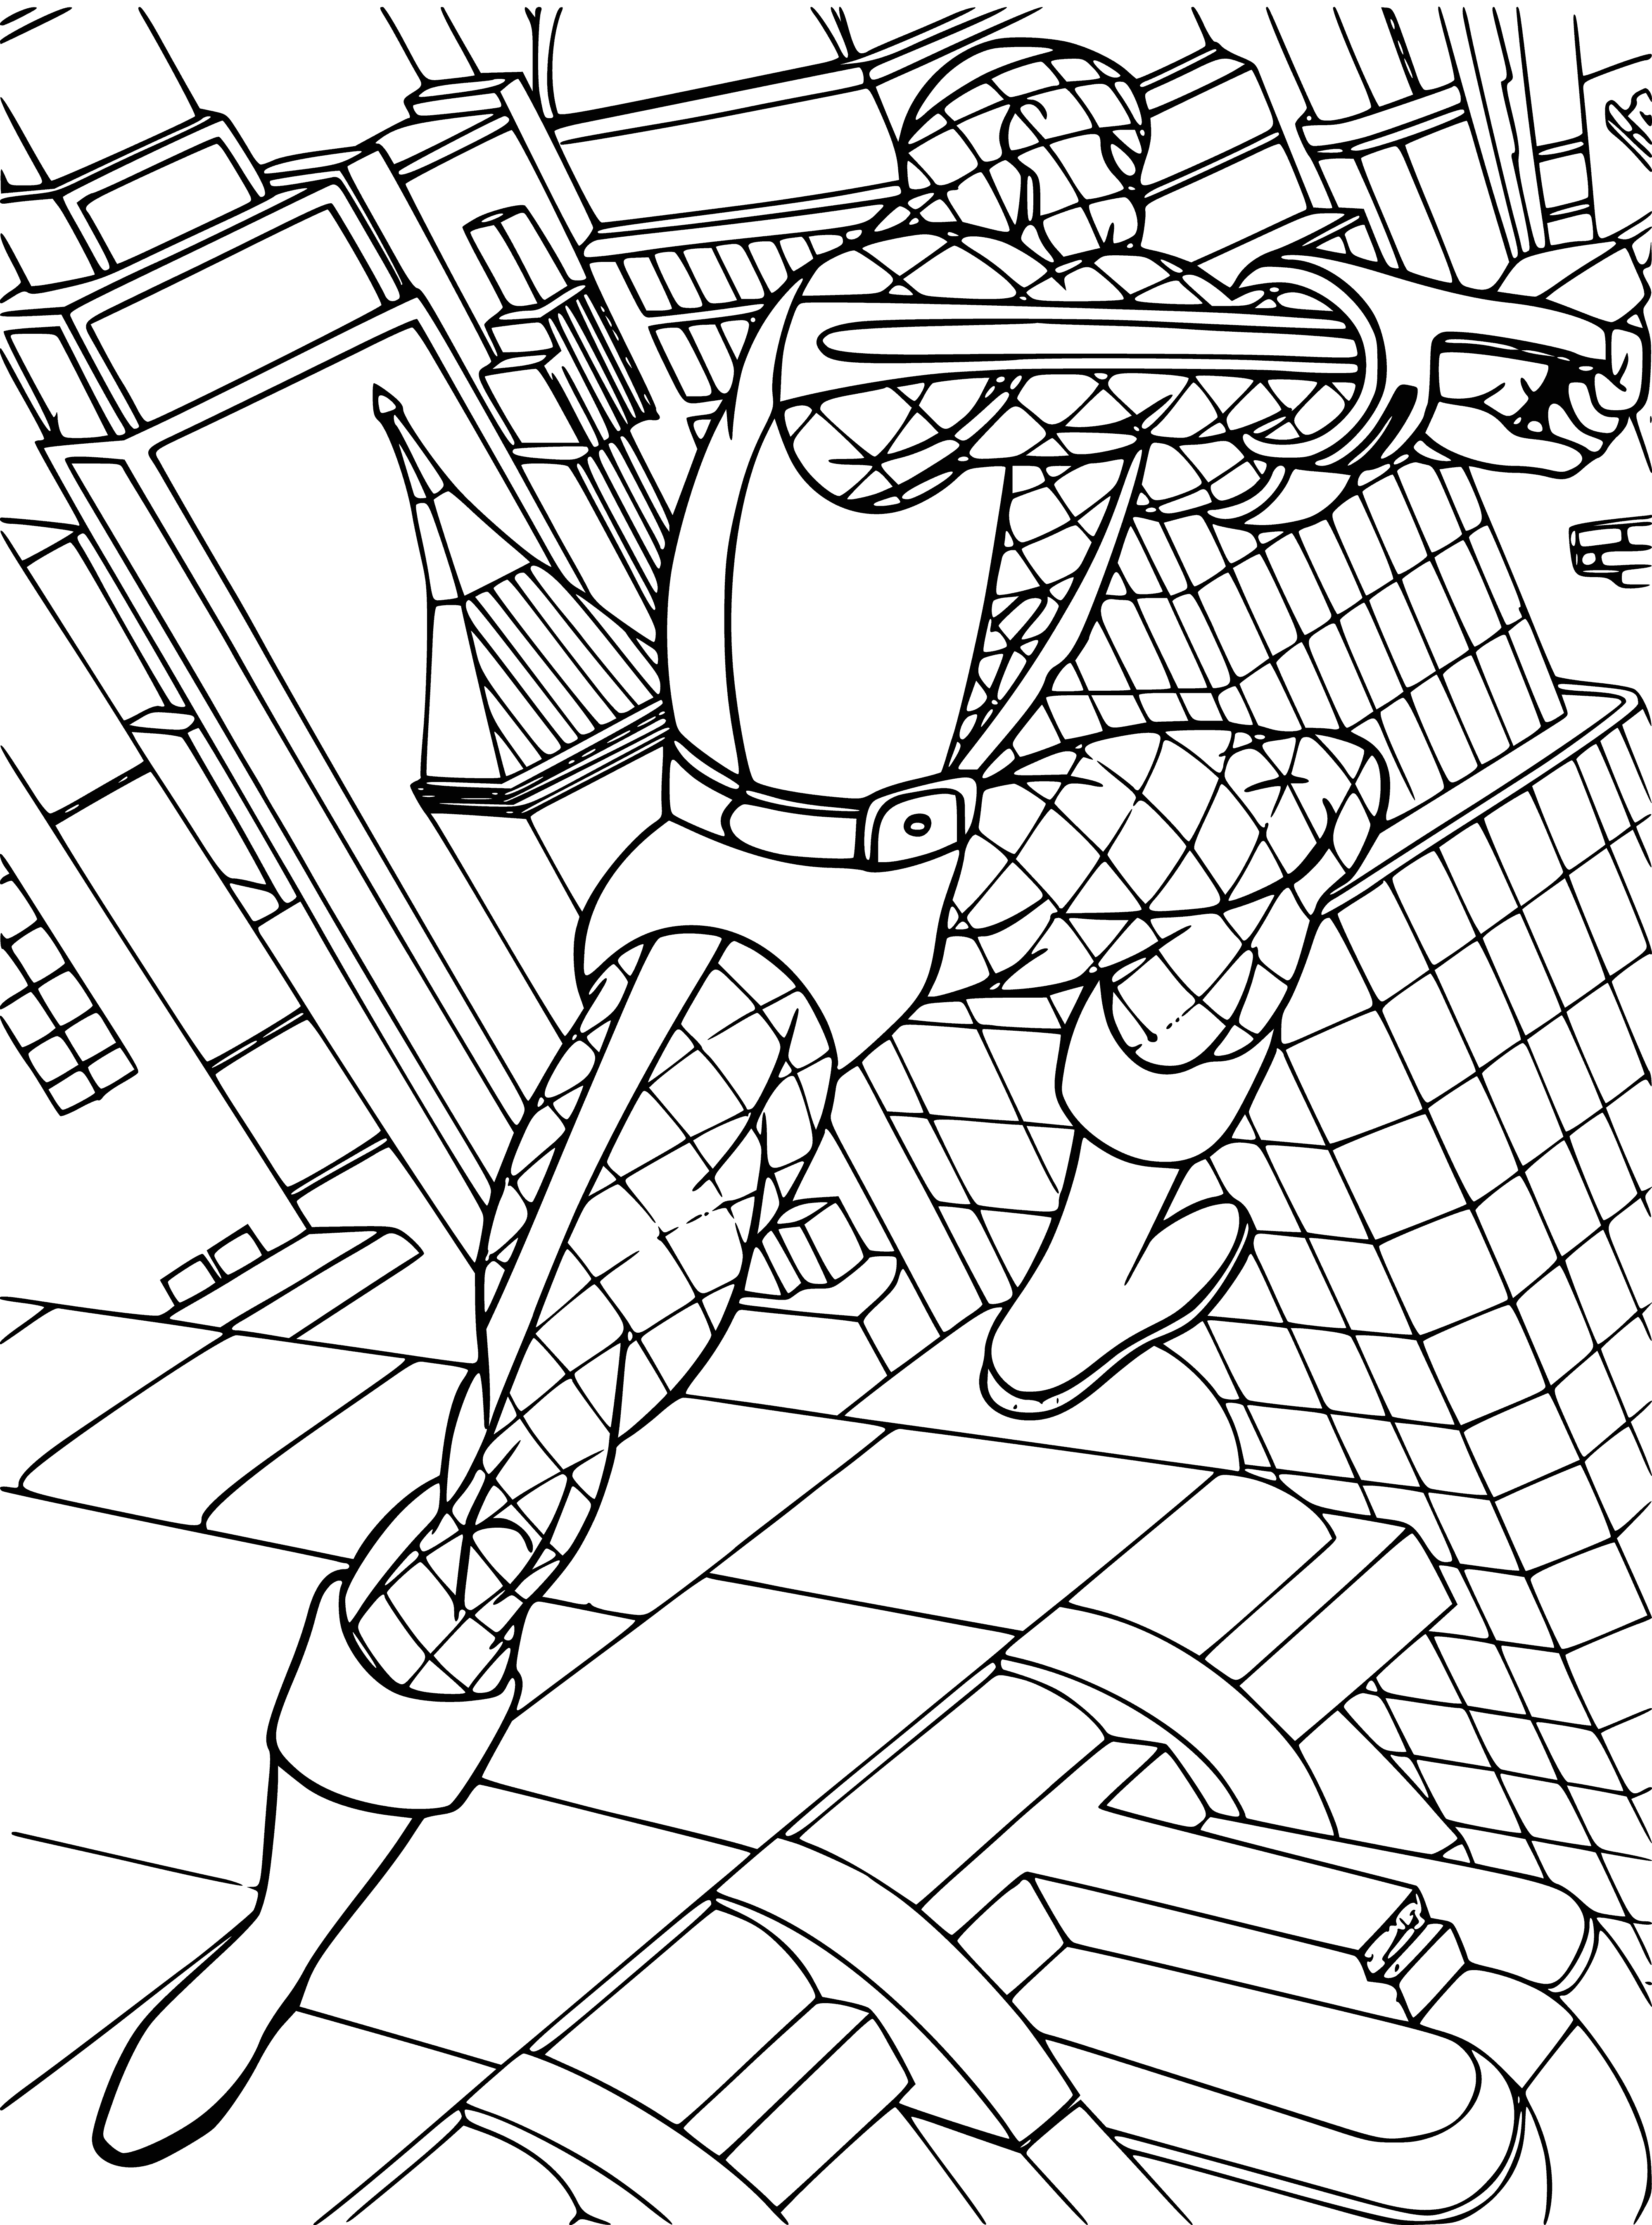 Enemy of Spider-Man coloring page